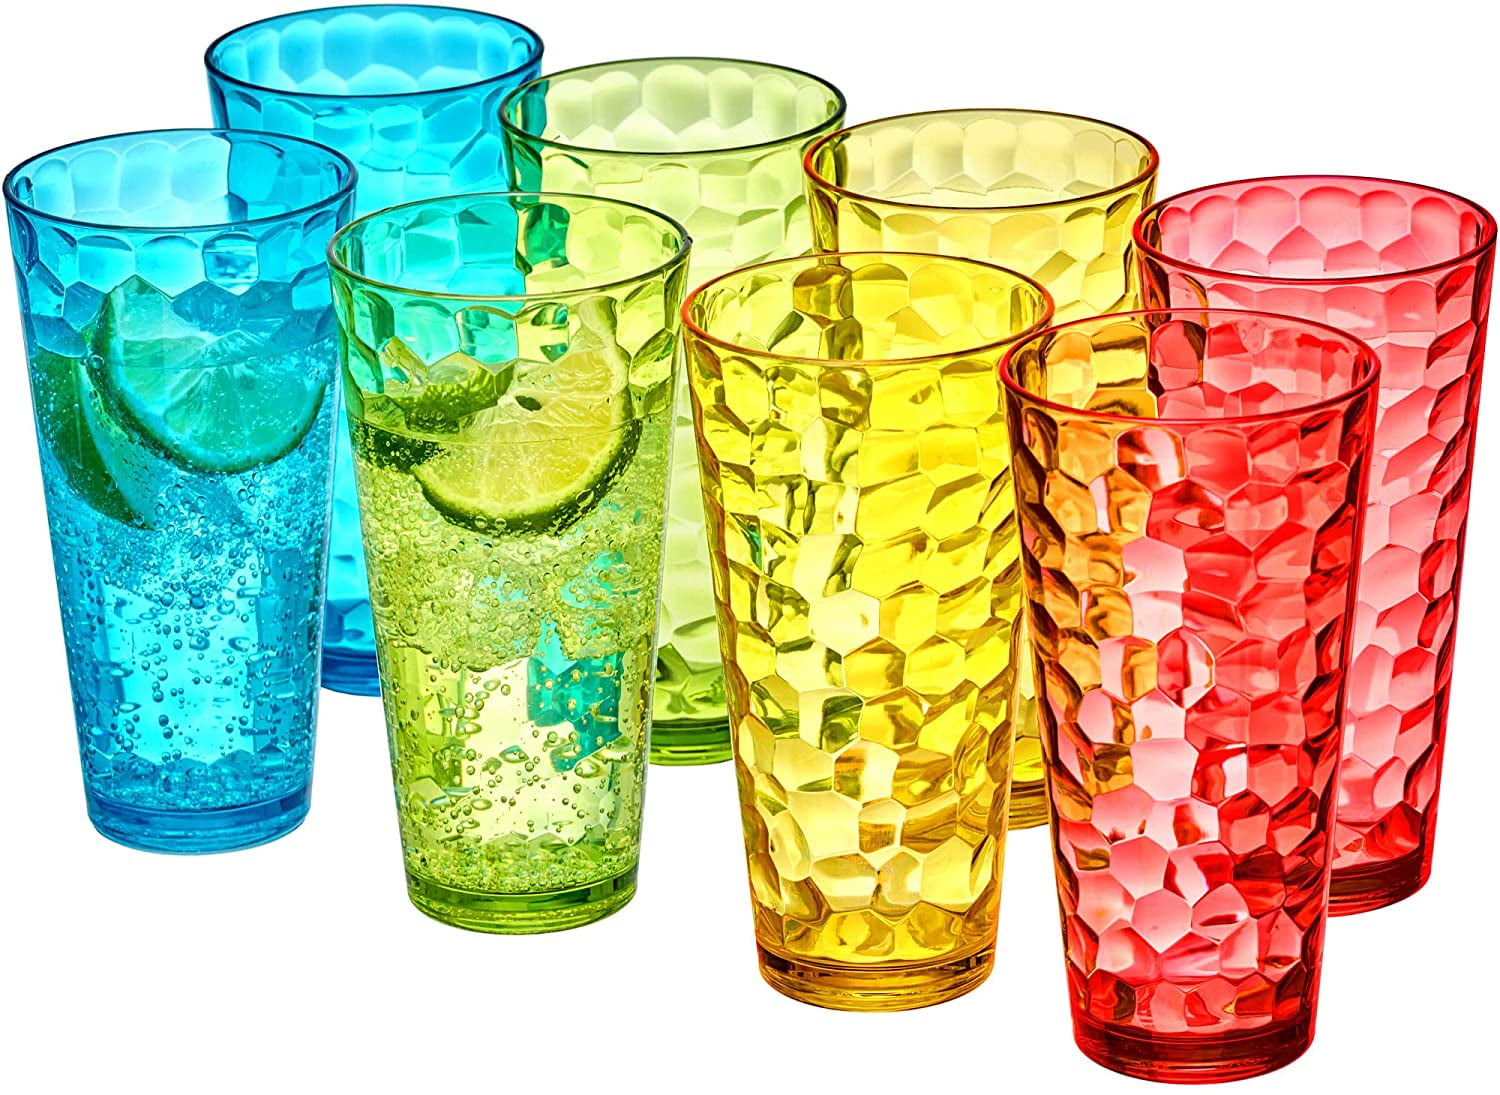 Mixed Drinkware 22-ounce Plastic Tumbler Acrylic Glasses with Honeycomb Design set of 6 Clear